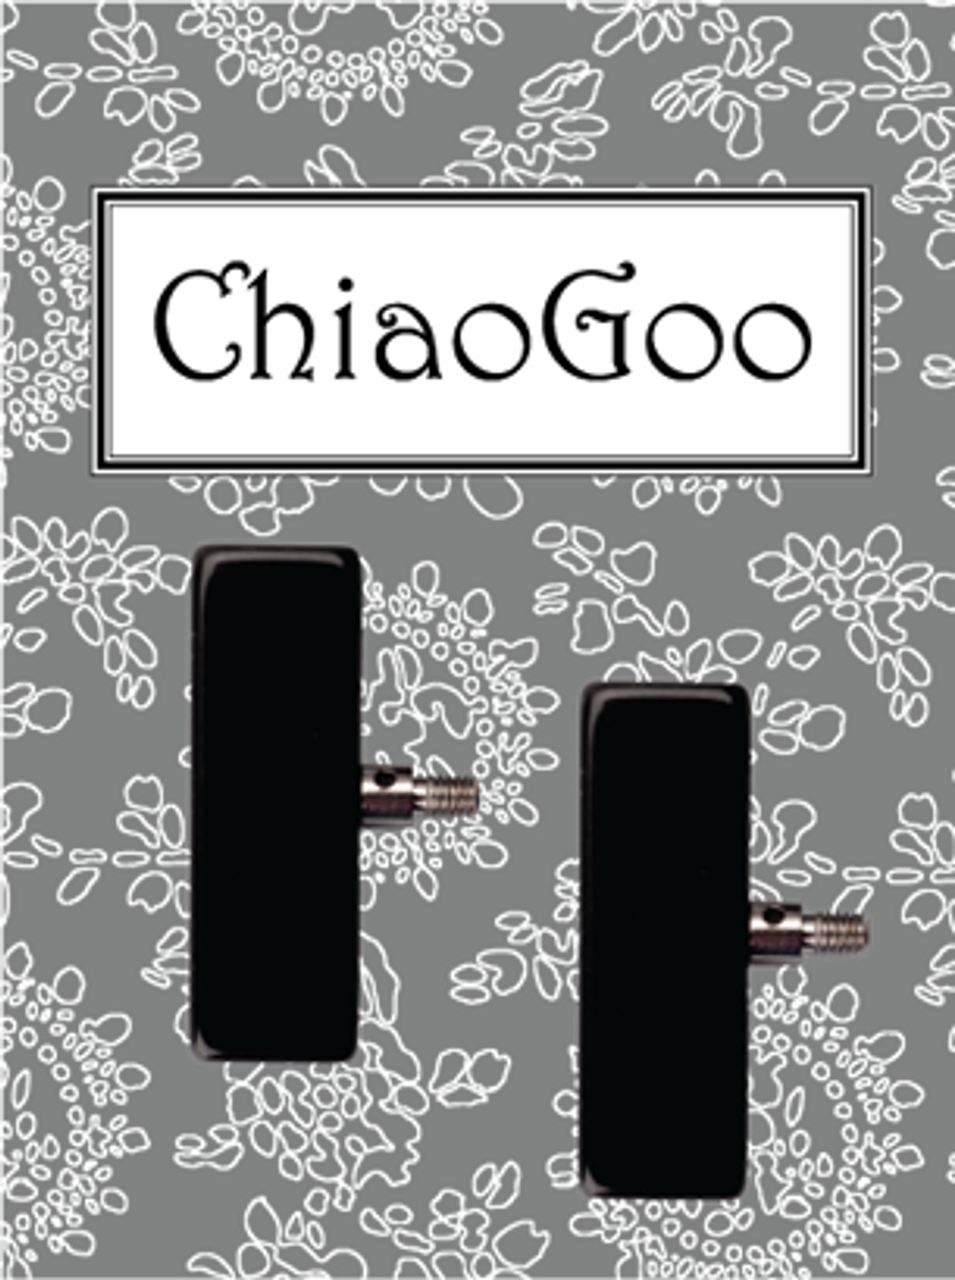 ChiaoGoo Interchangeable Knitting Needle Accessories at The Endless Skein